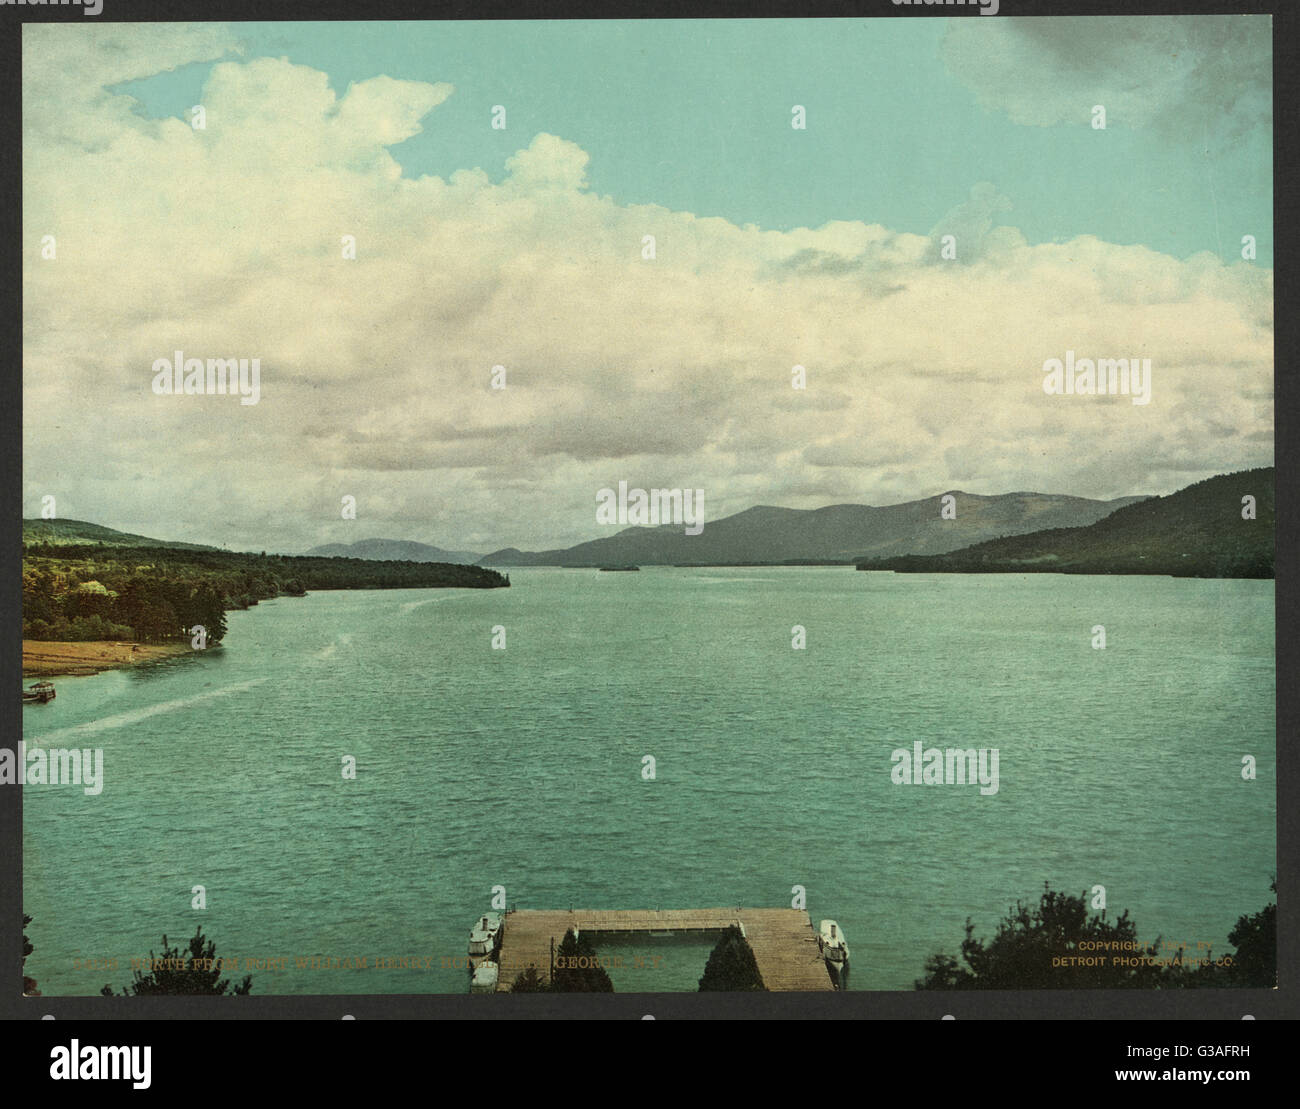 North from Fort William Henry Hotel, Lake George, N.Y. Stock Photo